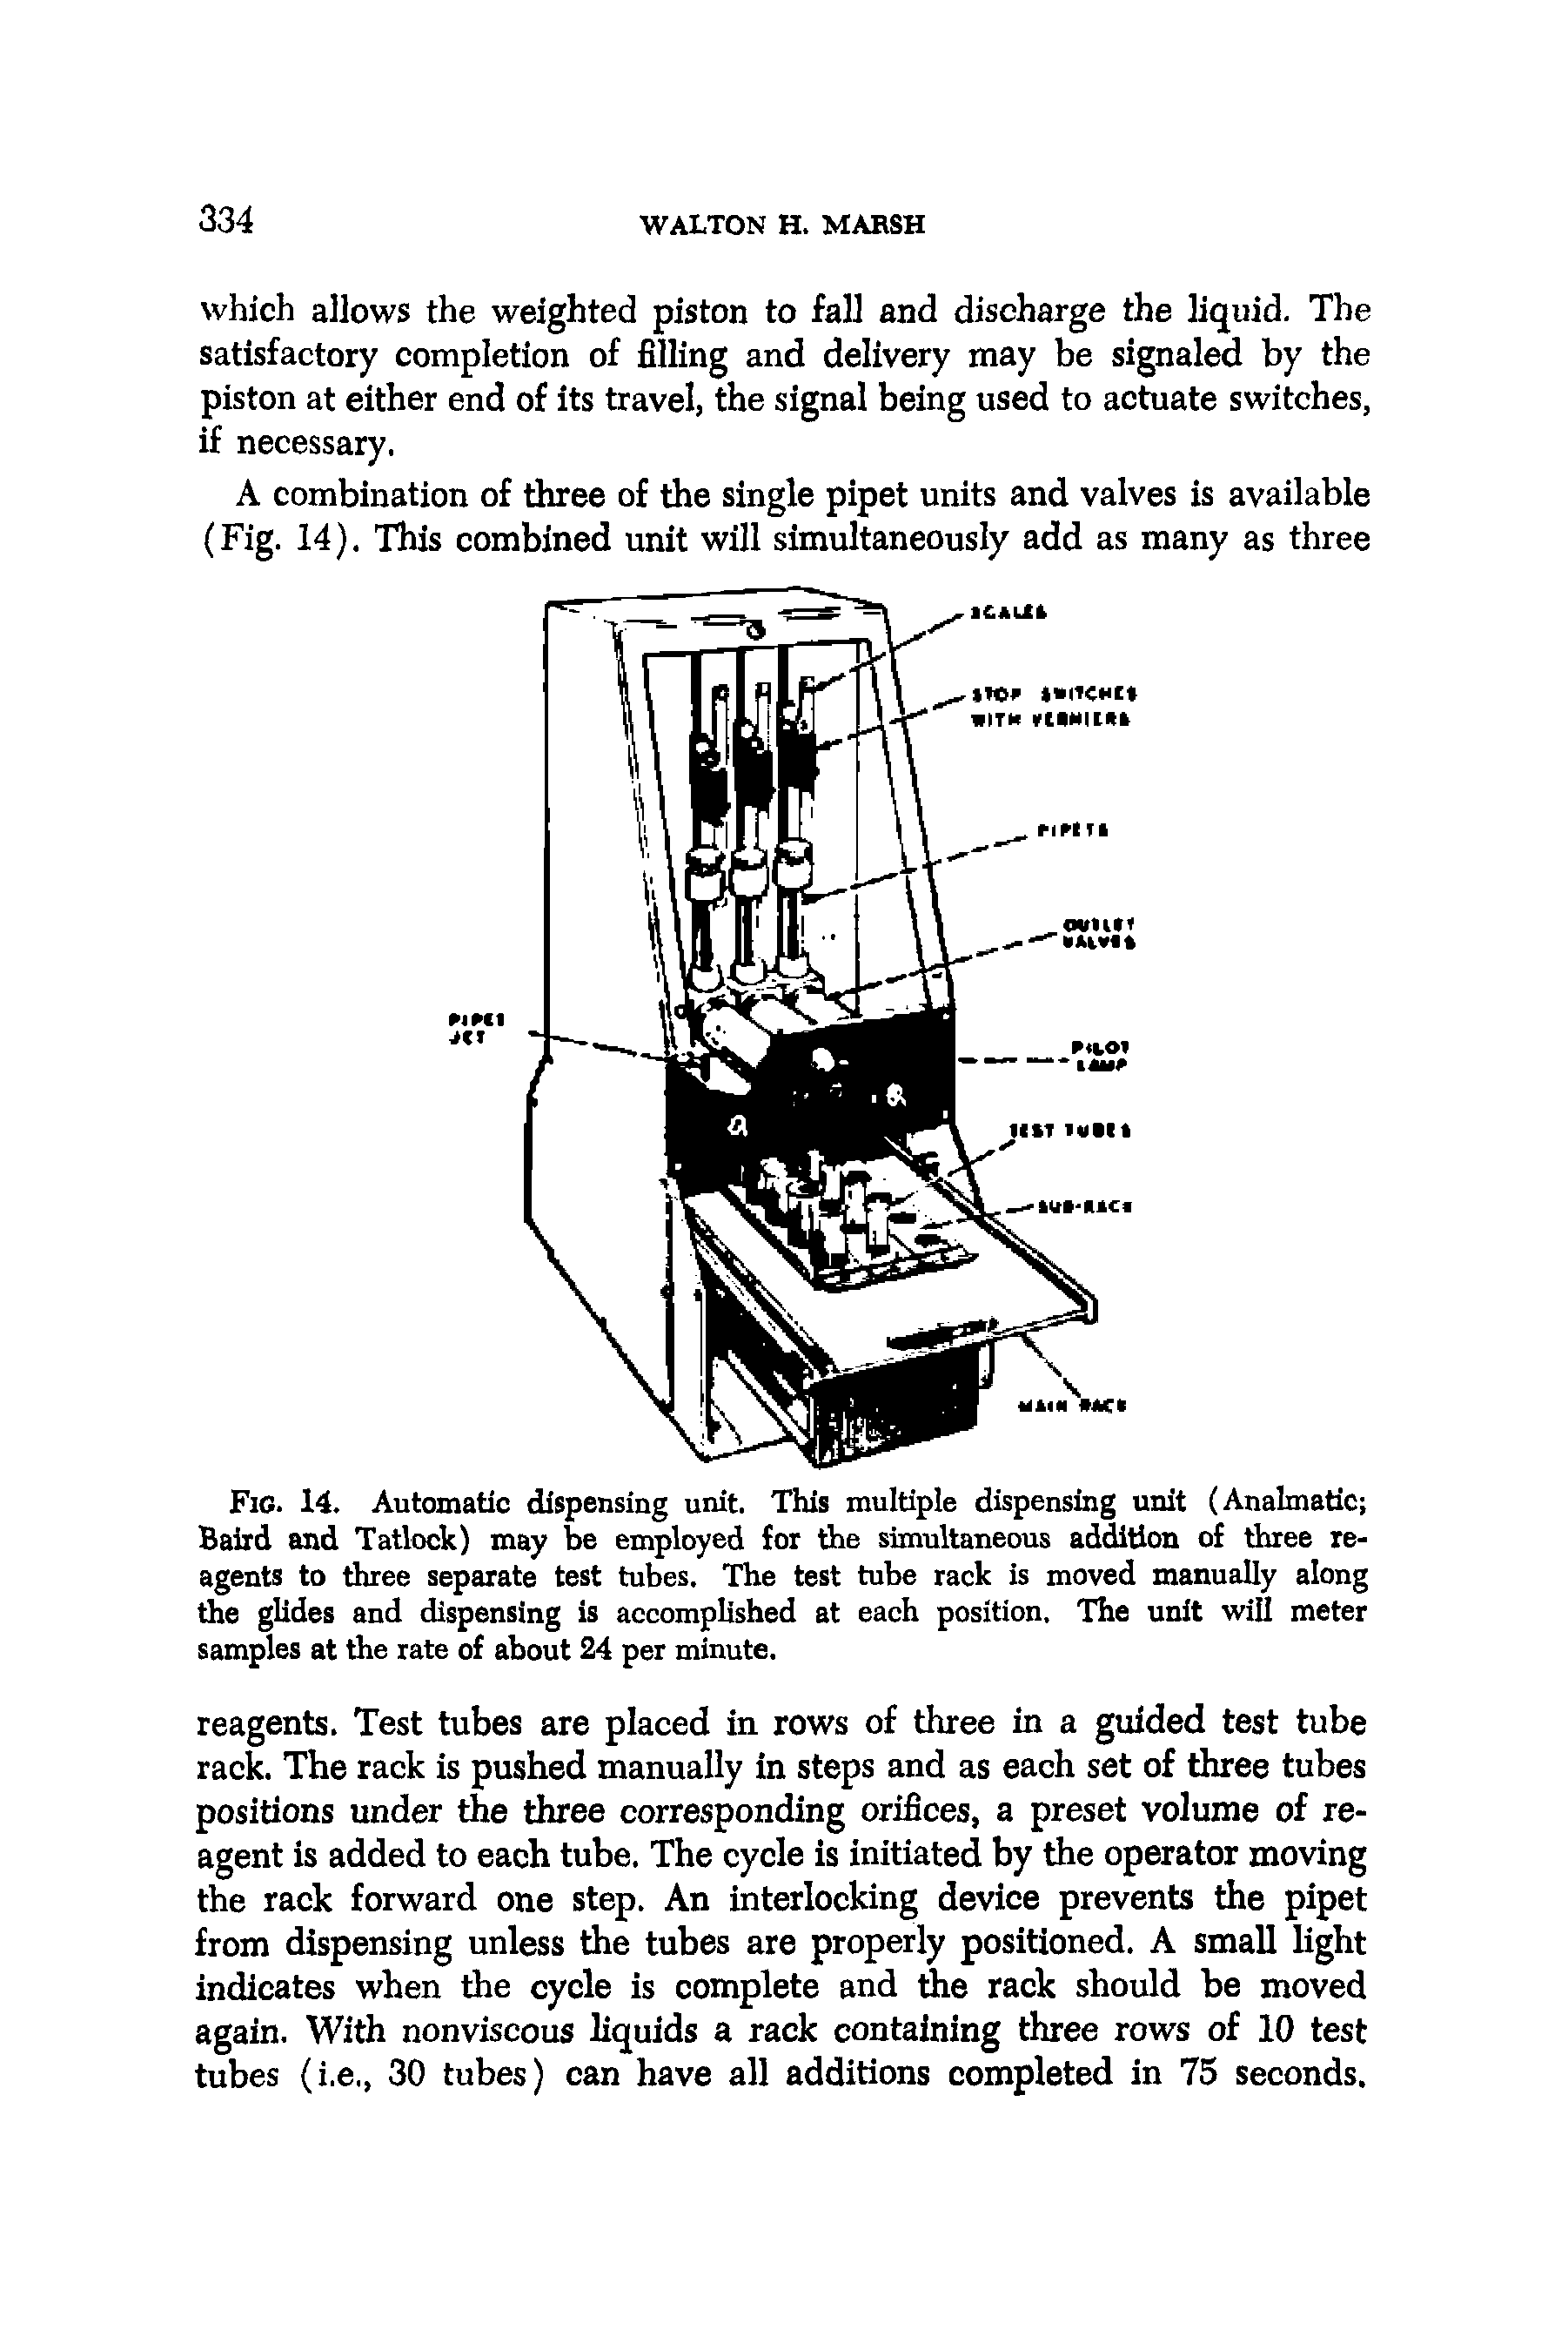 Fig. 14. Automatic dispensing unit. This multiple dispensing unit (Analmatic Baird and Tatlock) may be employed for the simultaneous addition of three reagents to three separate test tubes. The test tube rack is moved manually along the glides and dispensing is accomplished at each position. The unit will meter samples at the rate of about 24 per minute.